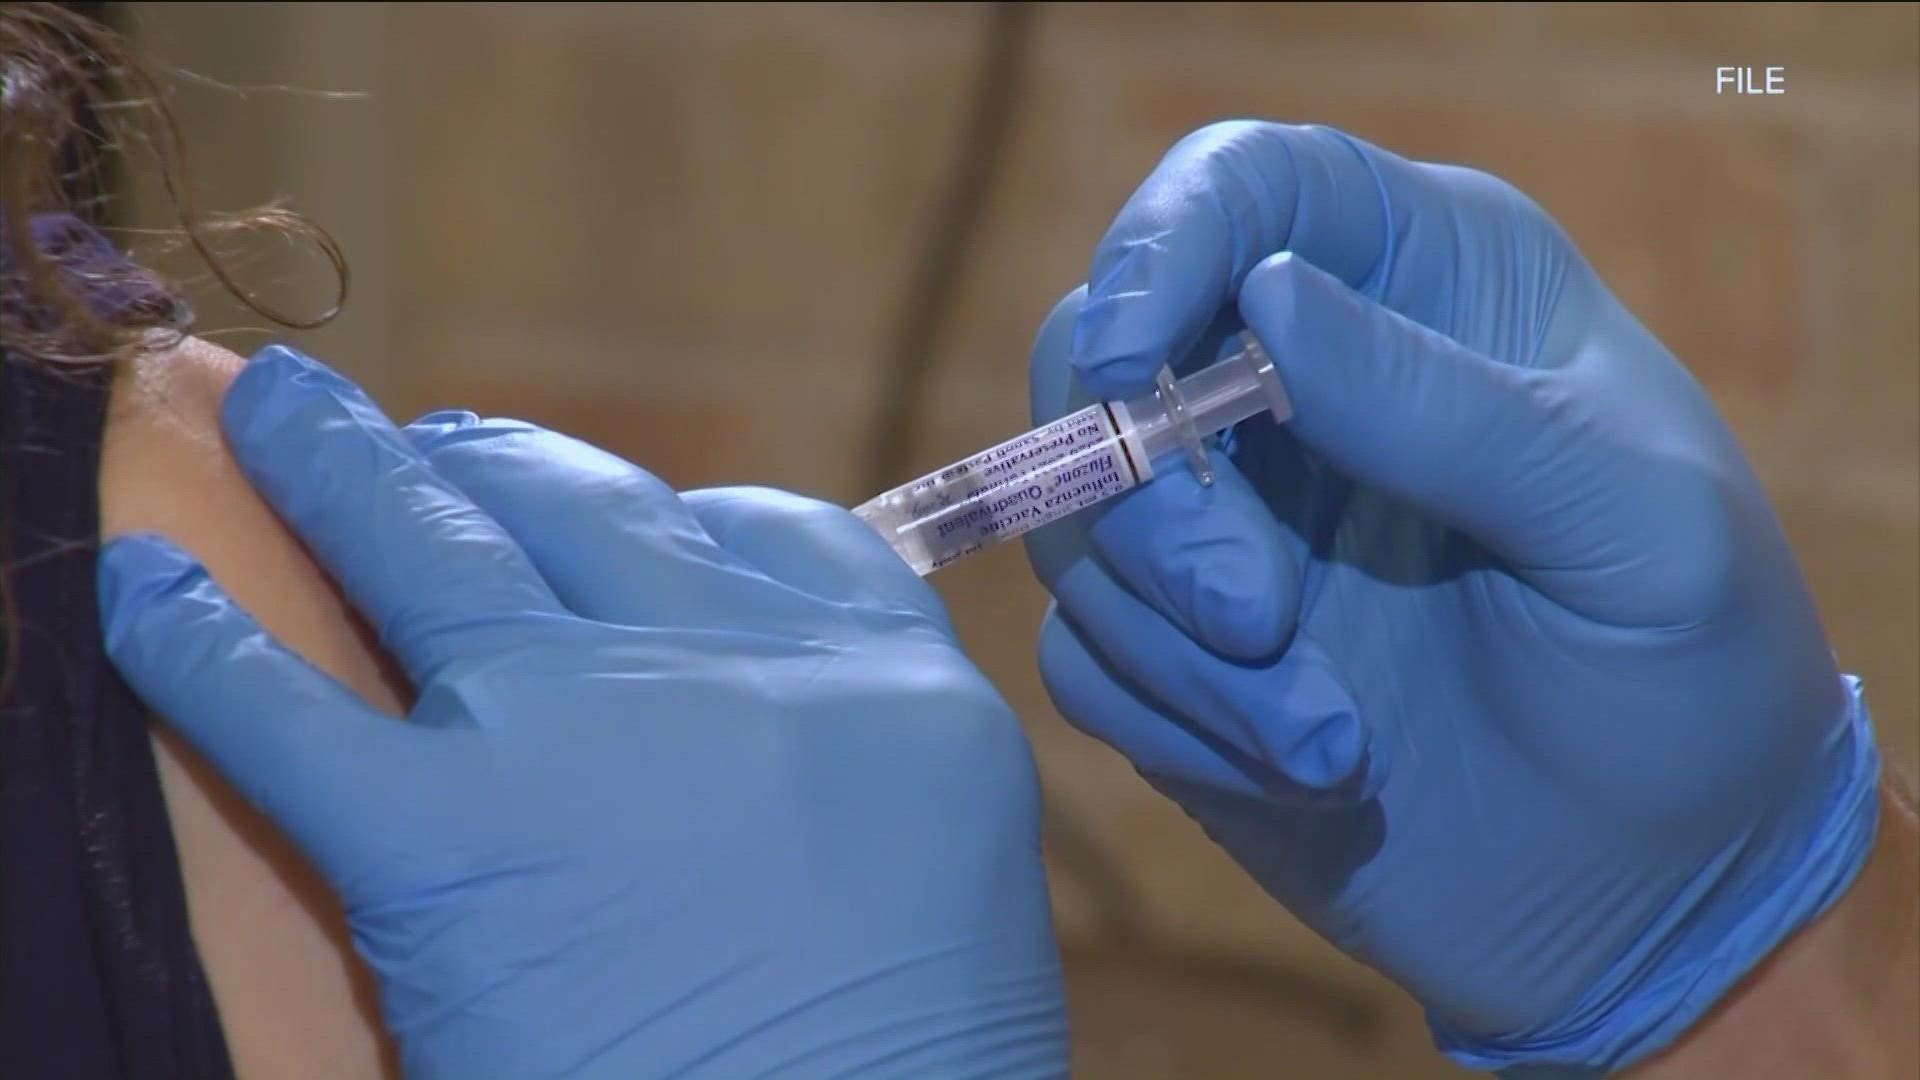 Health experts say a bad flu season could emerge as COVID-19 persists.